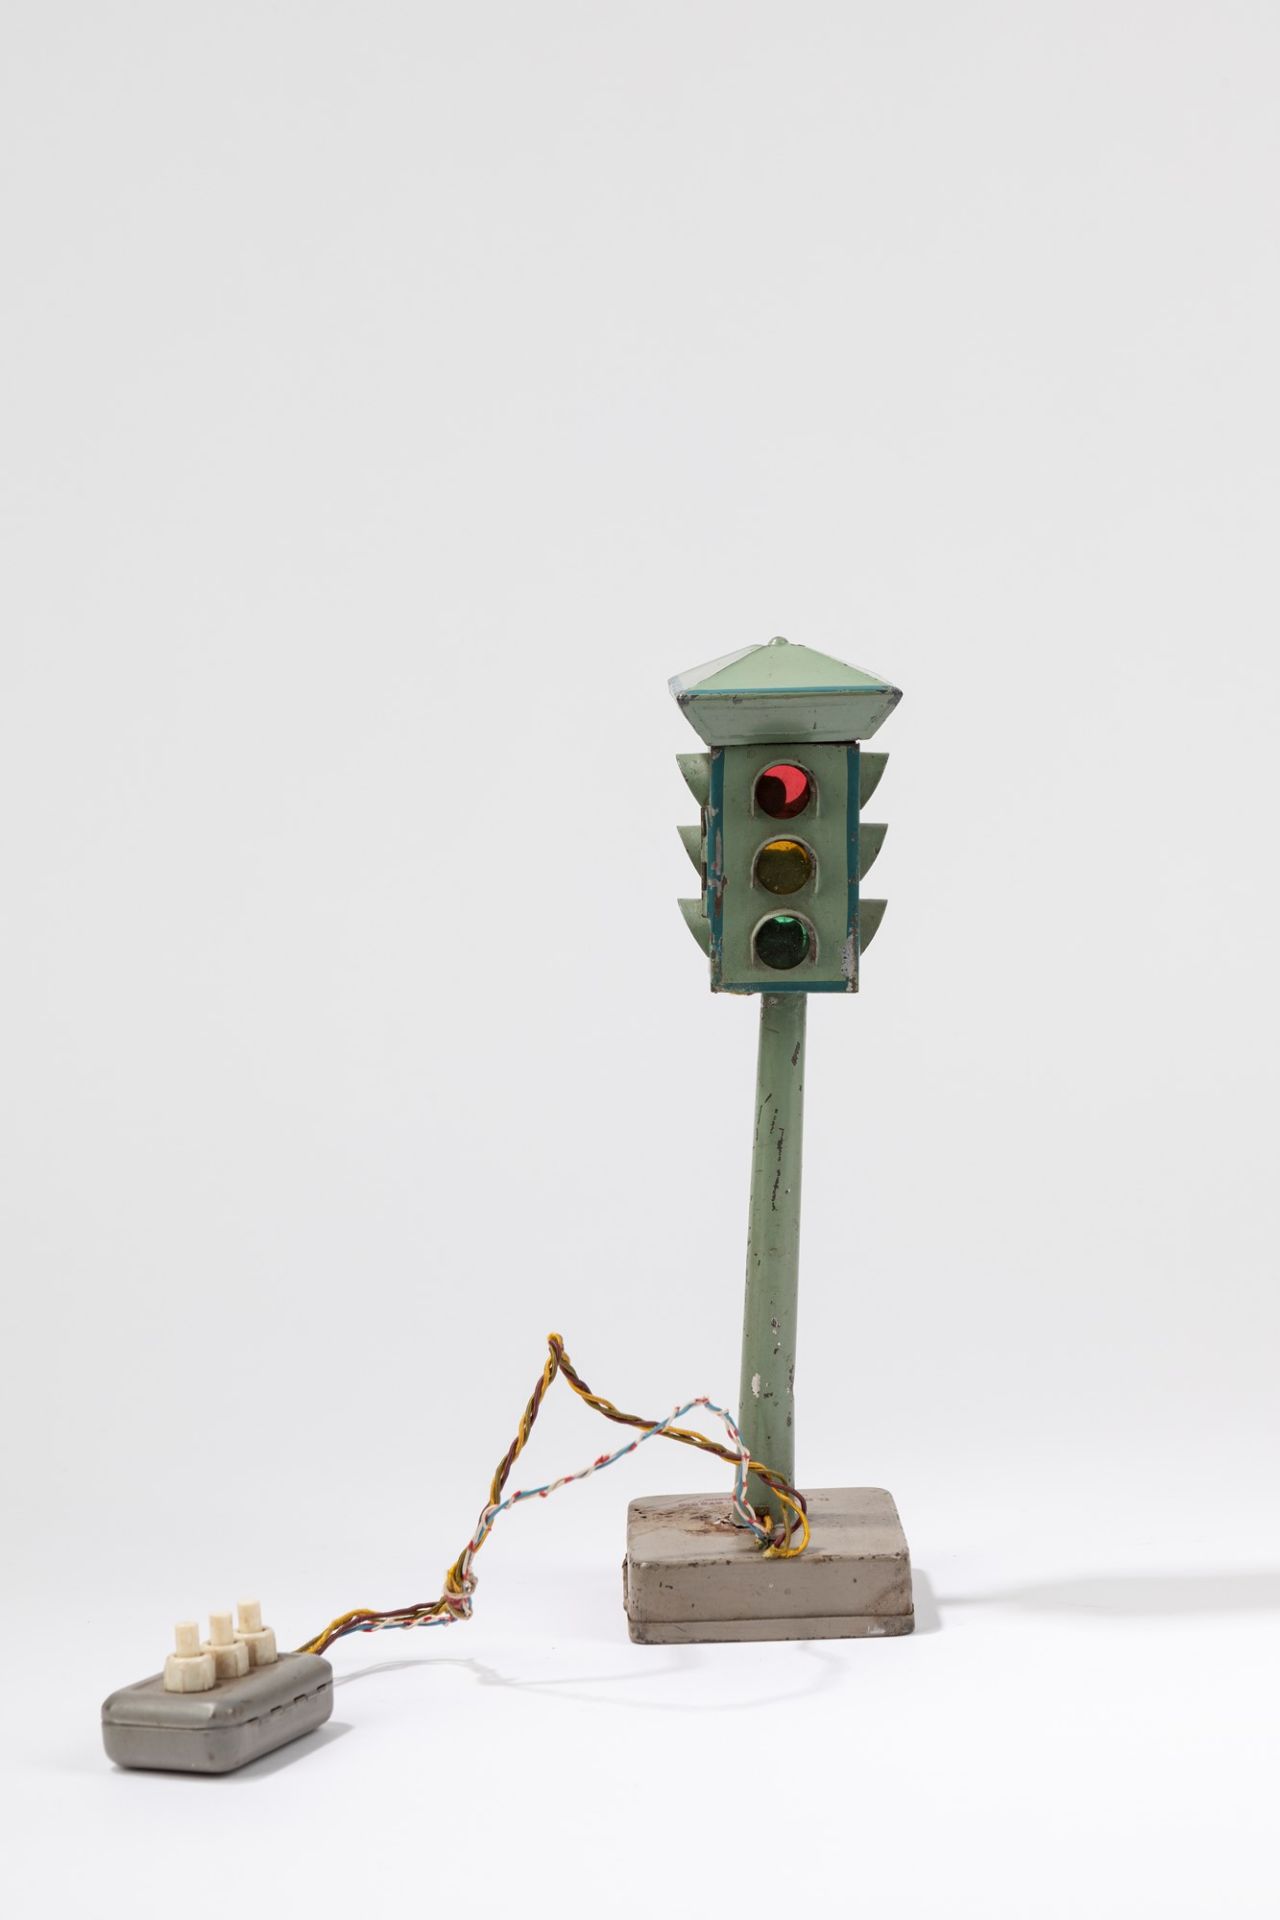 Doll & C. - Tin traffic light with lead lid, 1920-1925